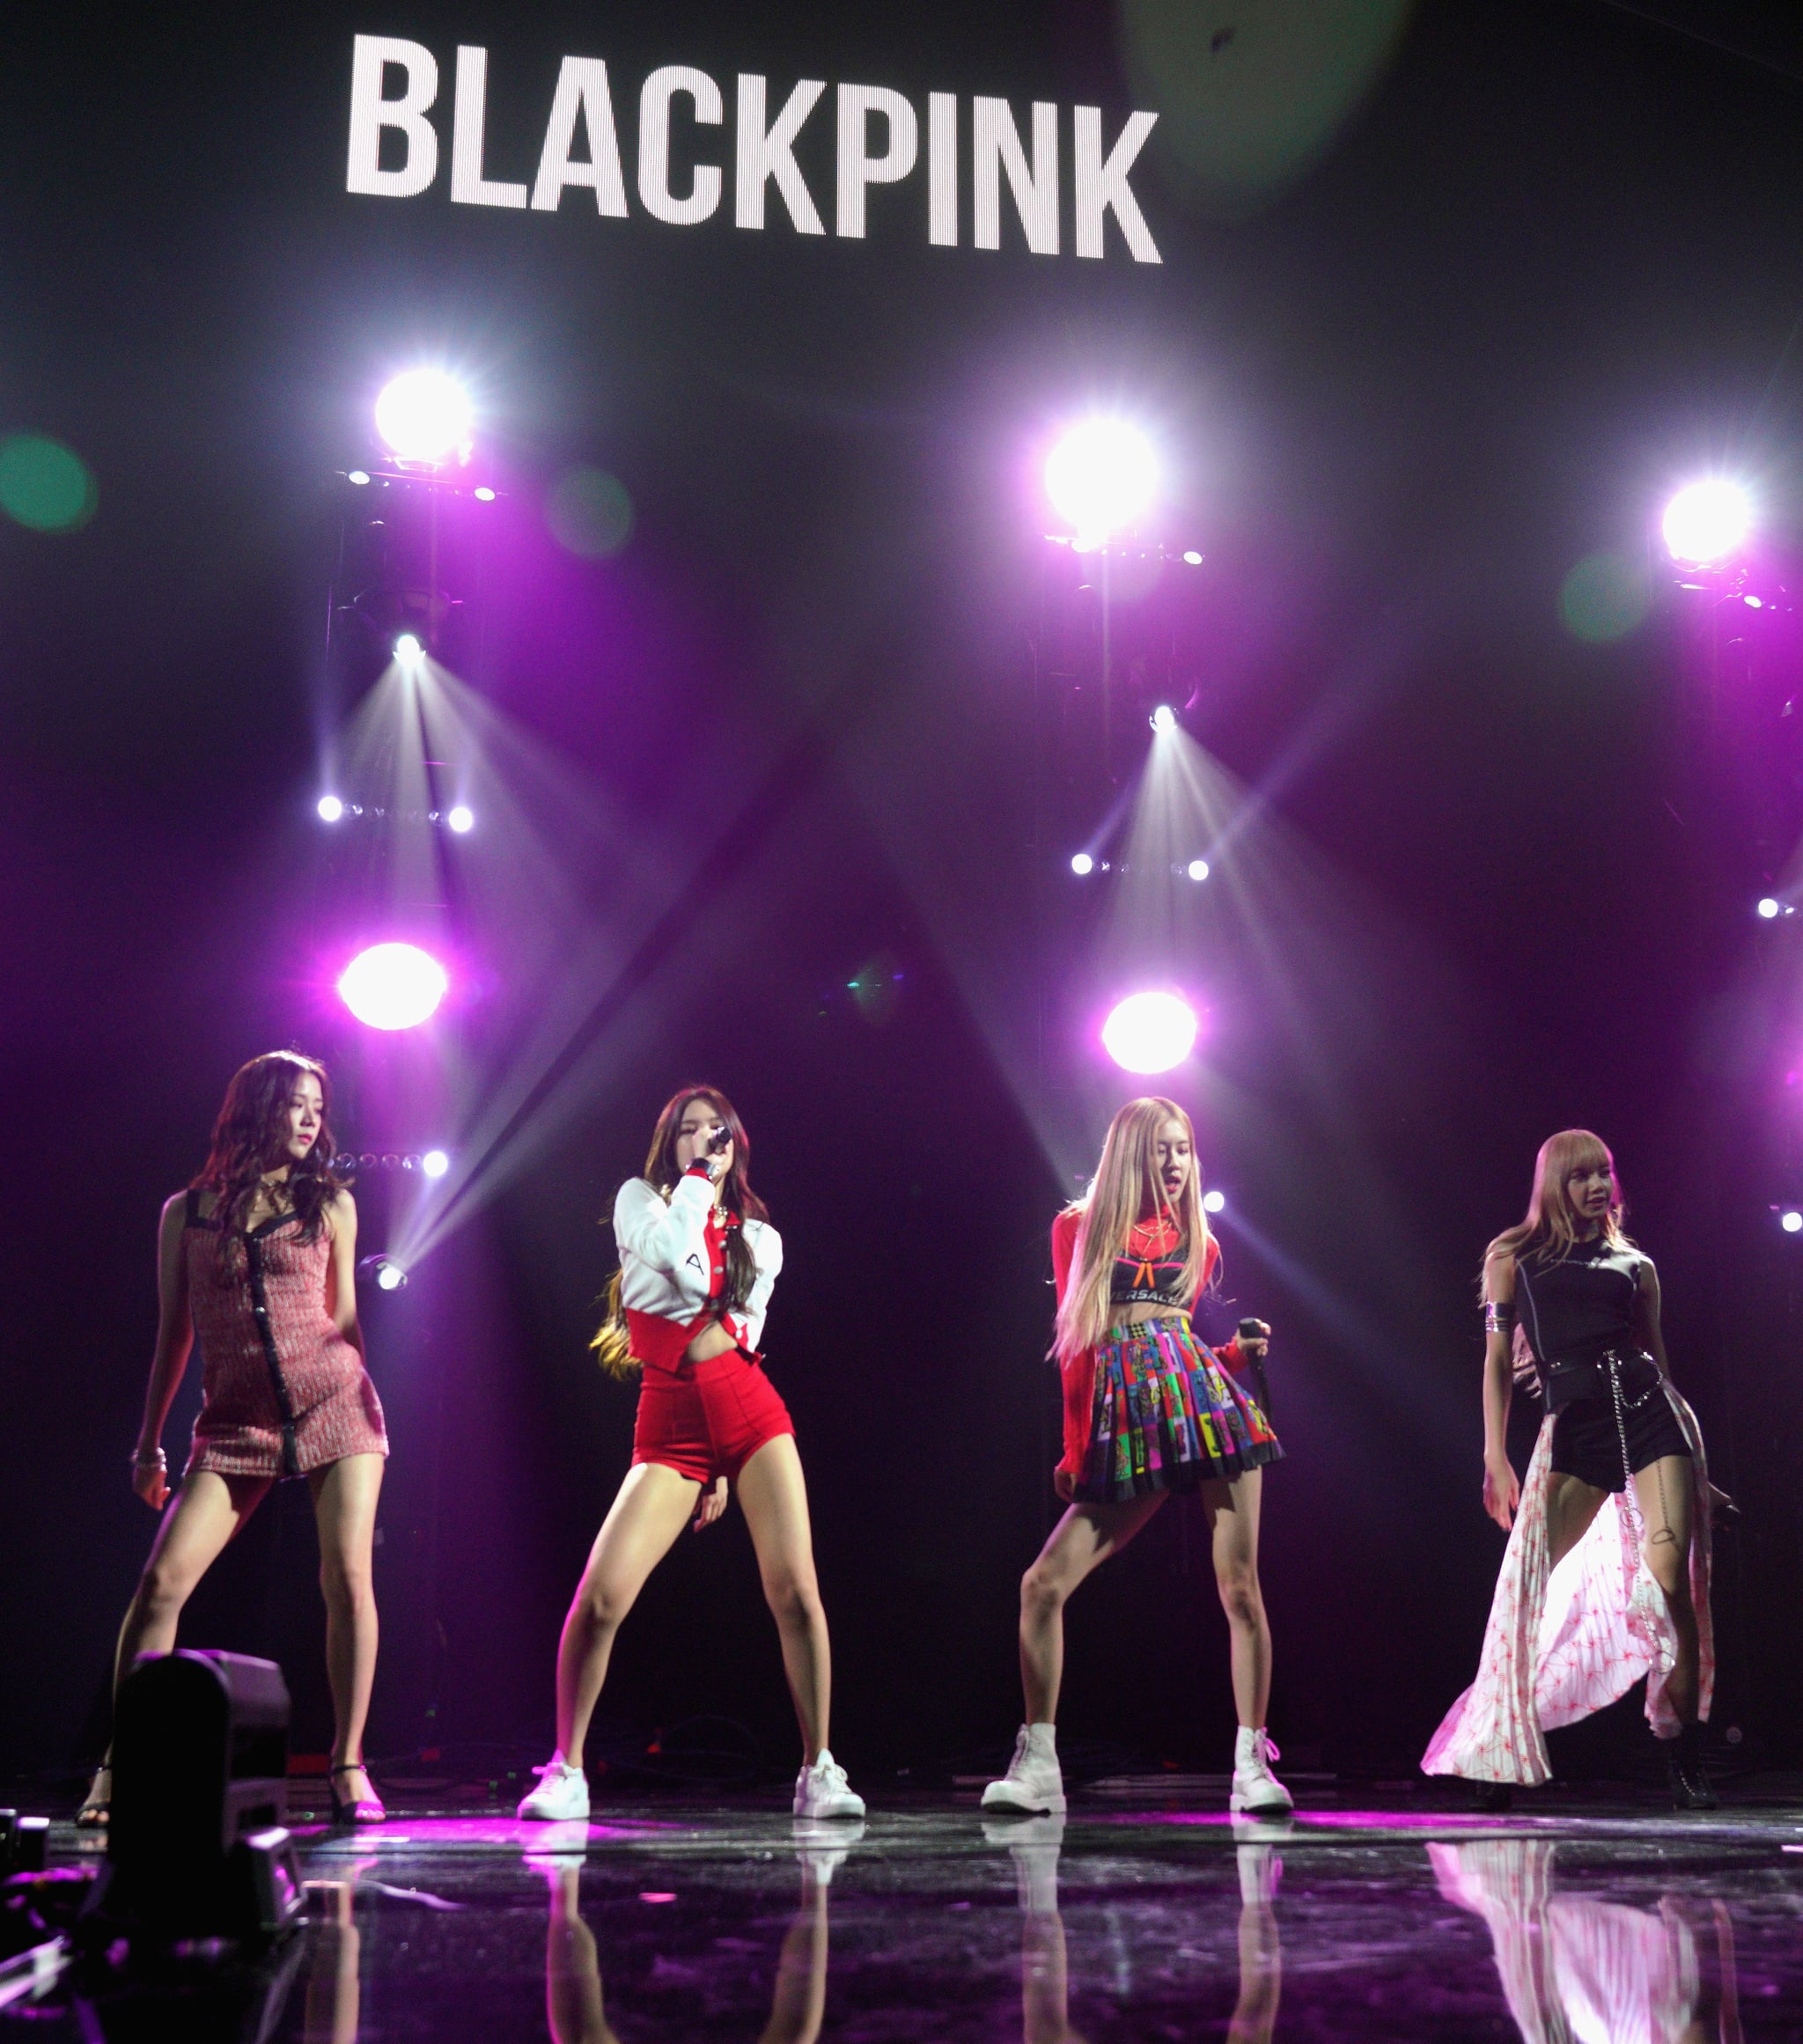 They Re Yg Entertainment S First Girl Group Since 2ne1 10 Blackpink Facts Every Fan Should Know Popsugar Celebrity Photo 3